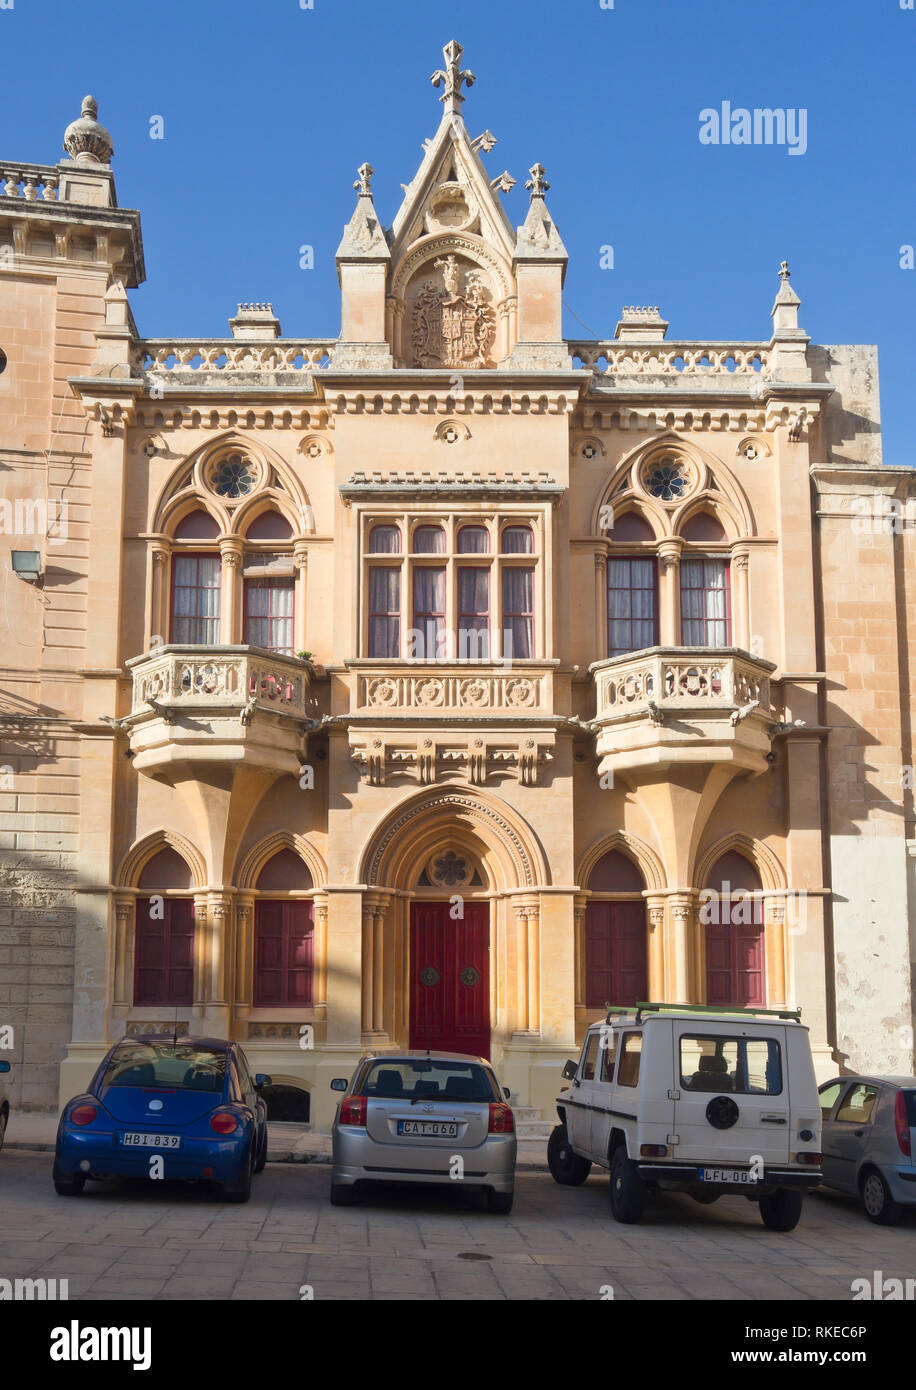 Buildings in the walled city of Mdina, the former capital of Malta Stock Photo